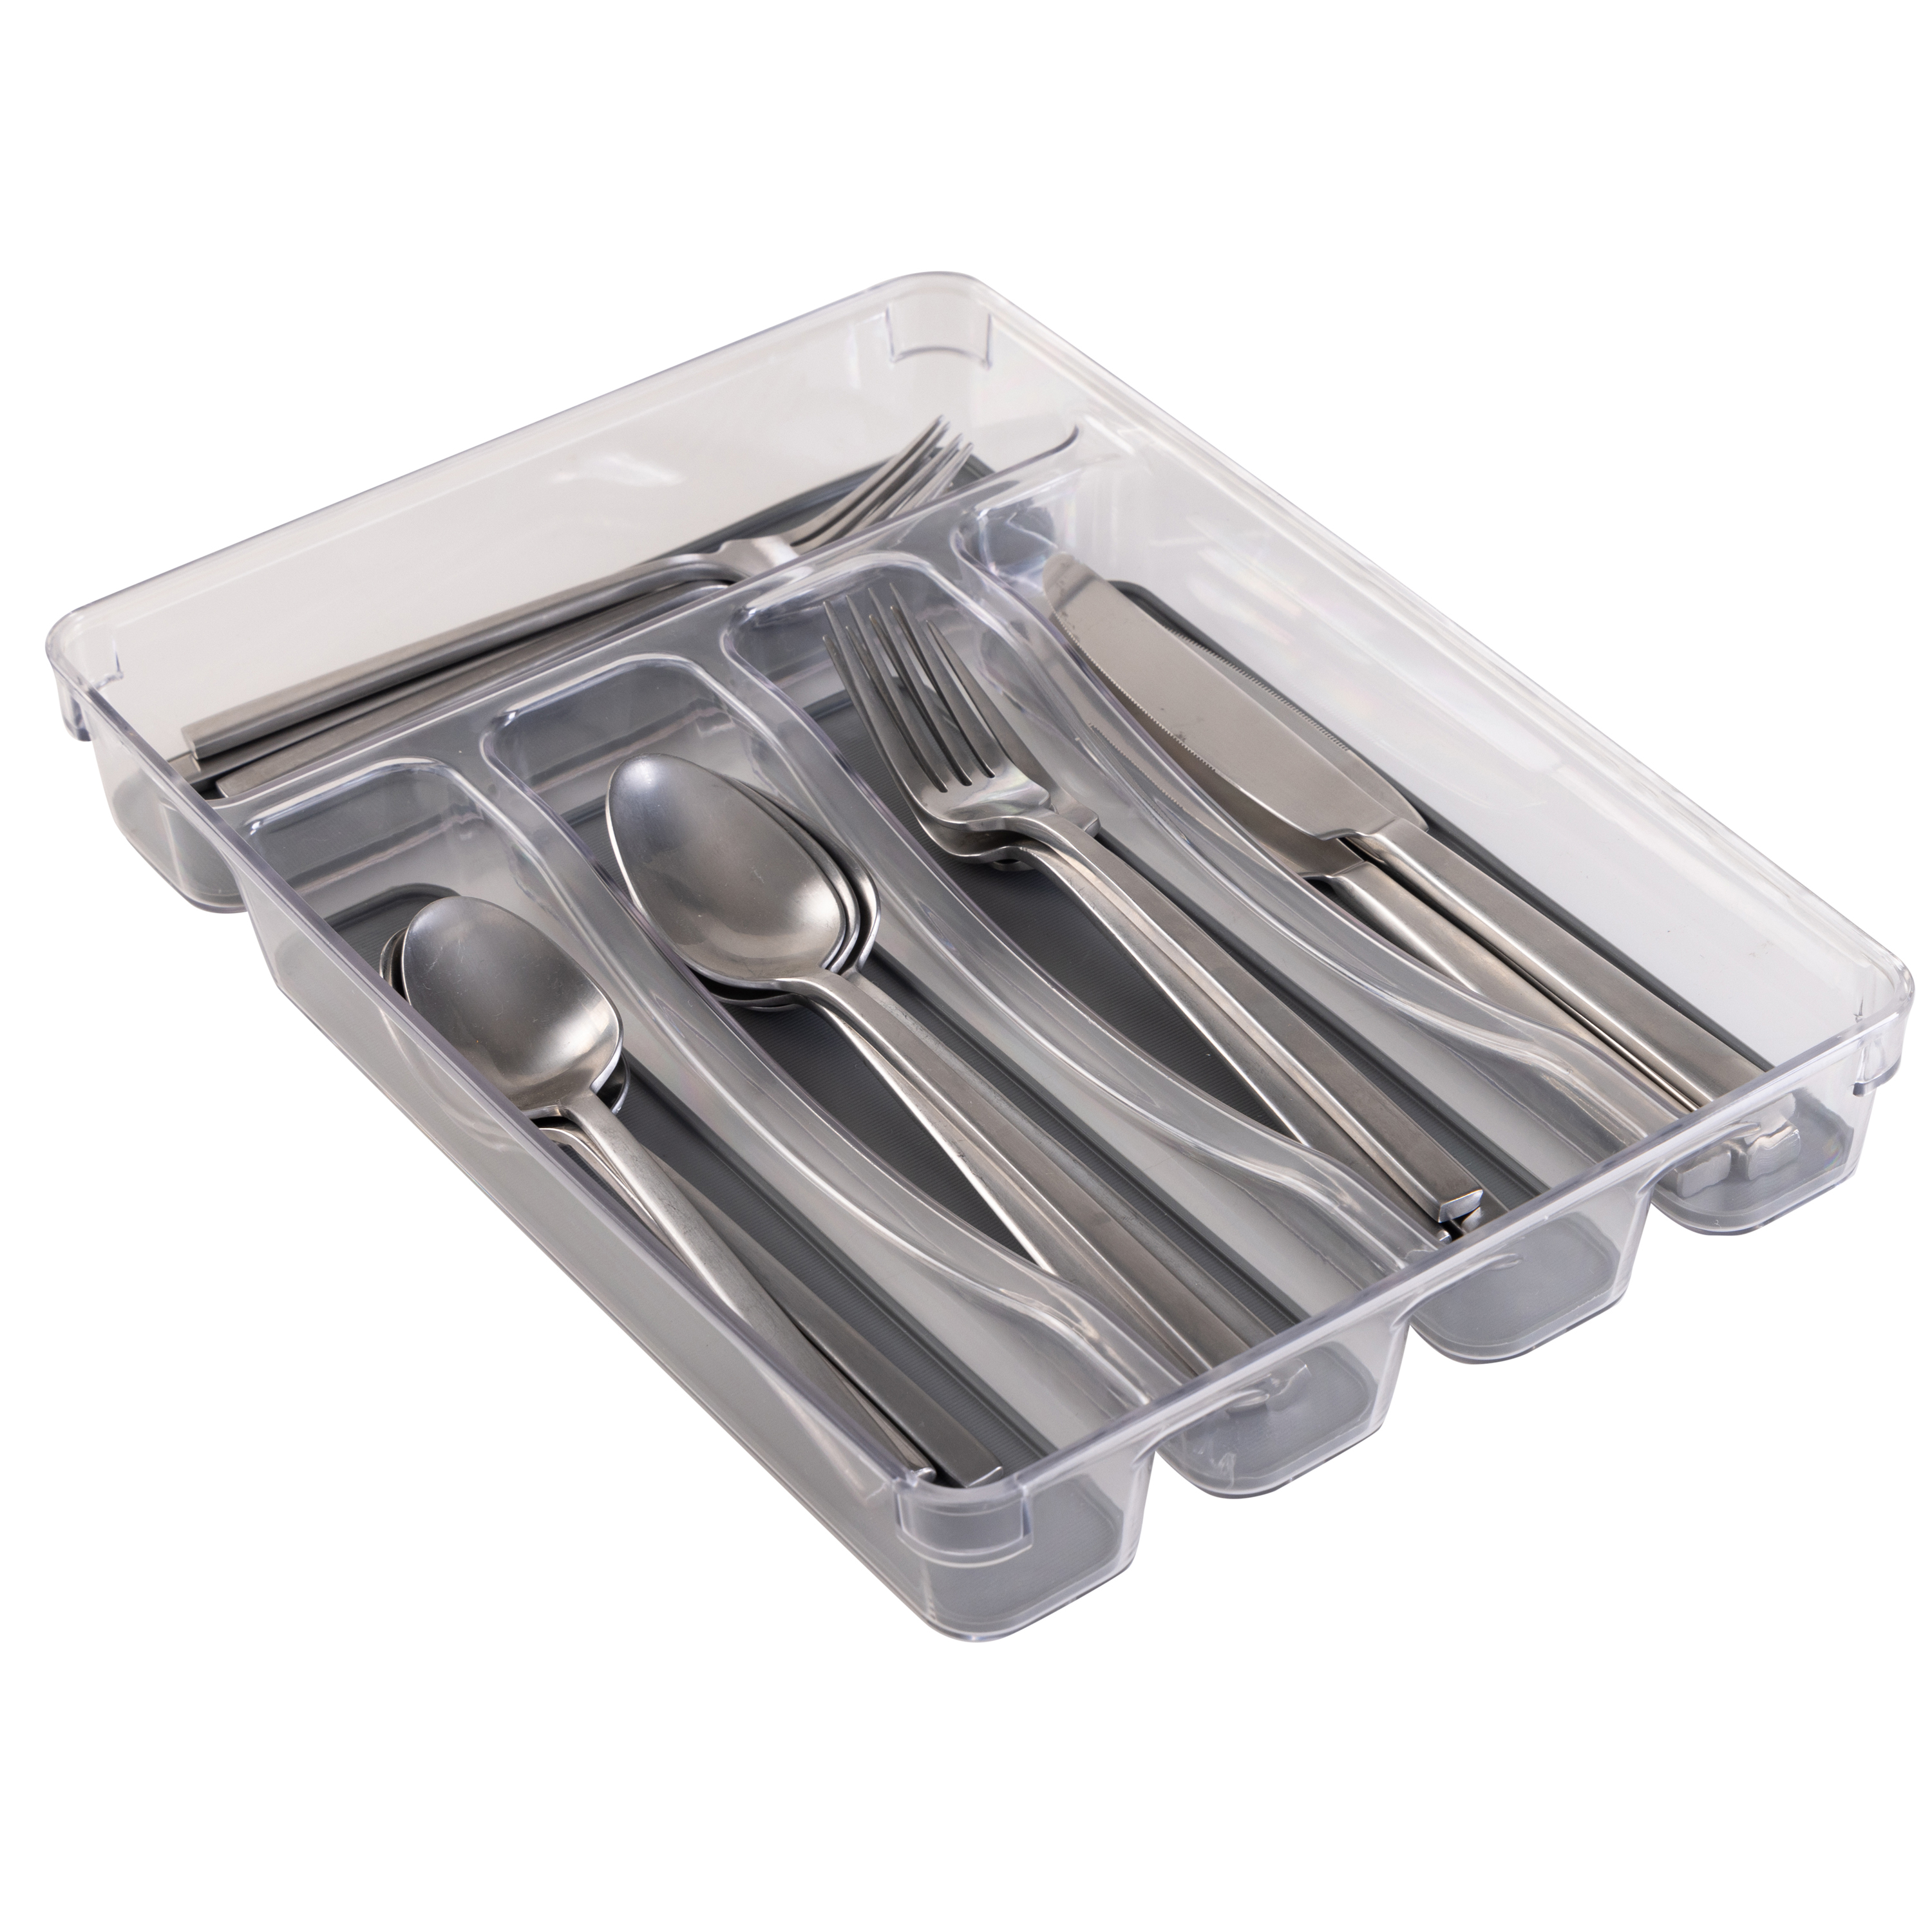 Kitchen Details 5 Compartment Plastic Cutlery Tray, Clear - image 1 of 8